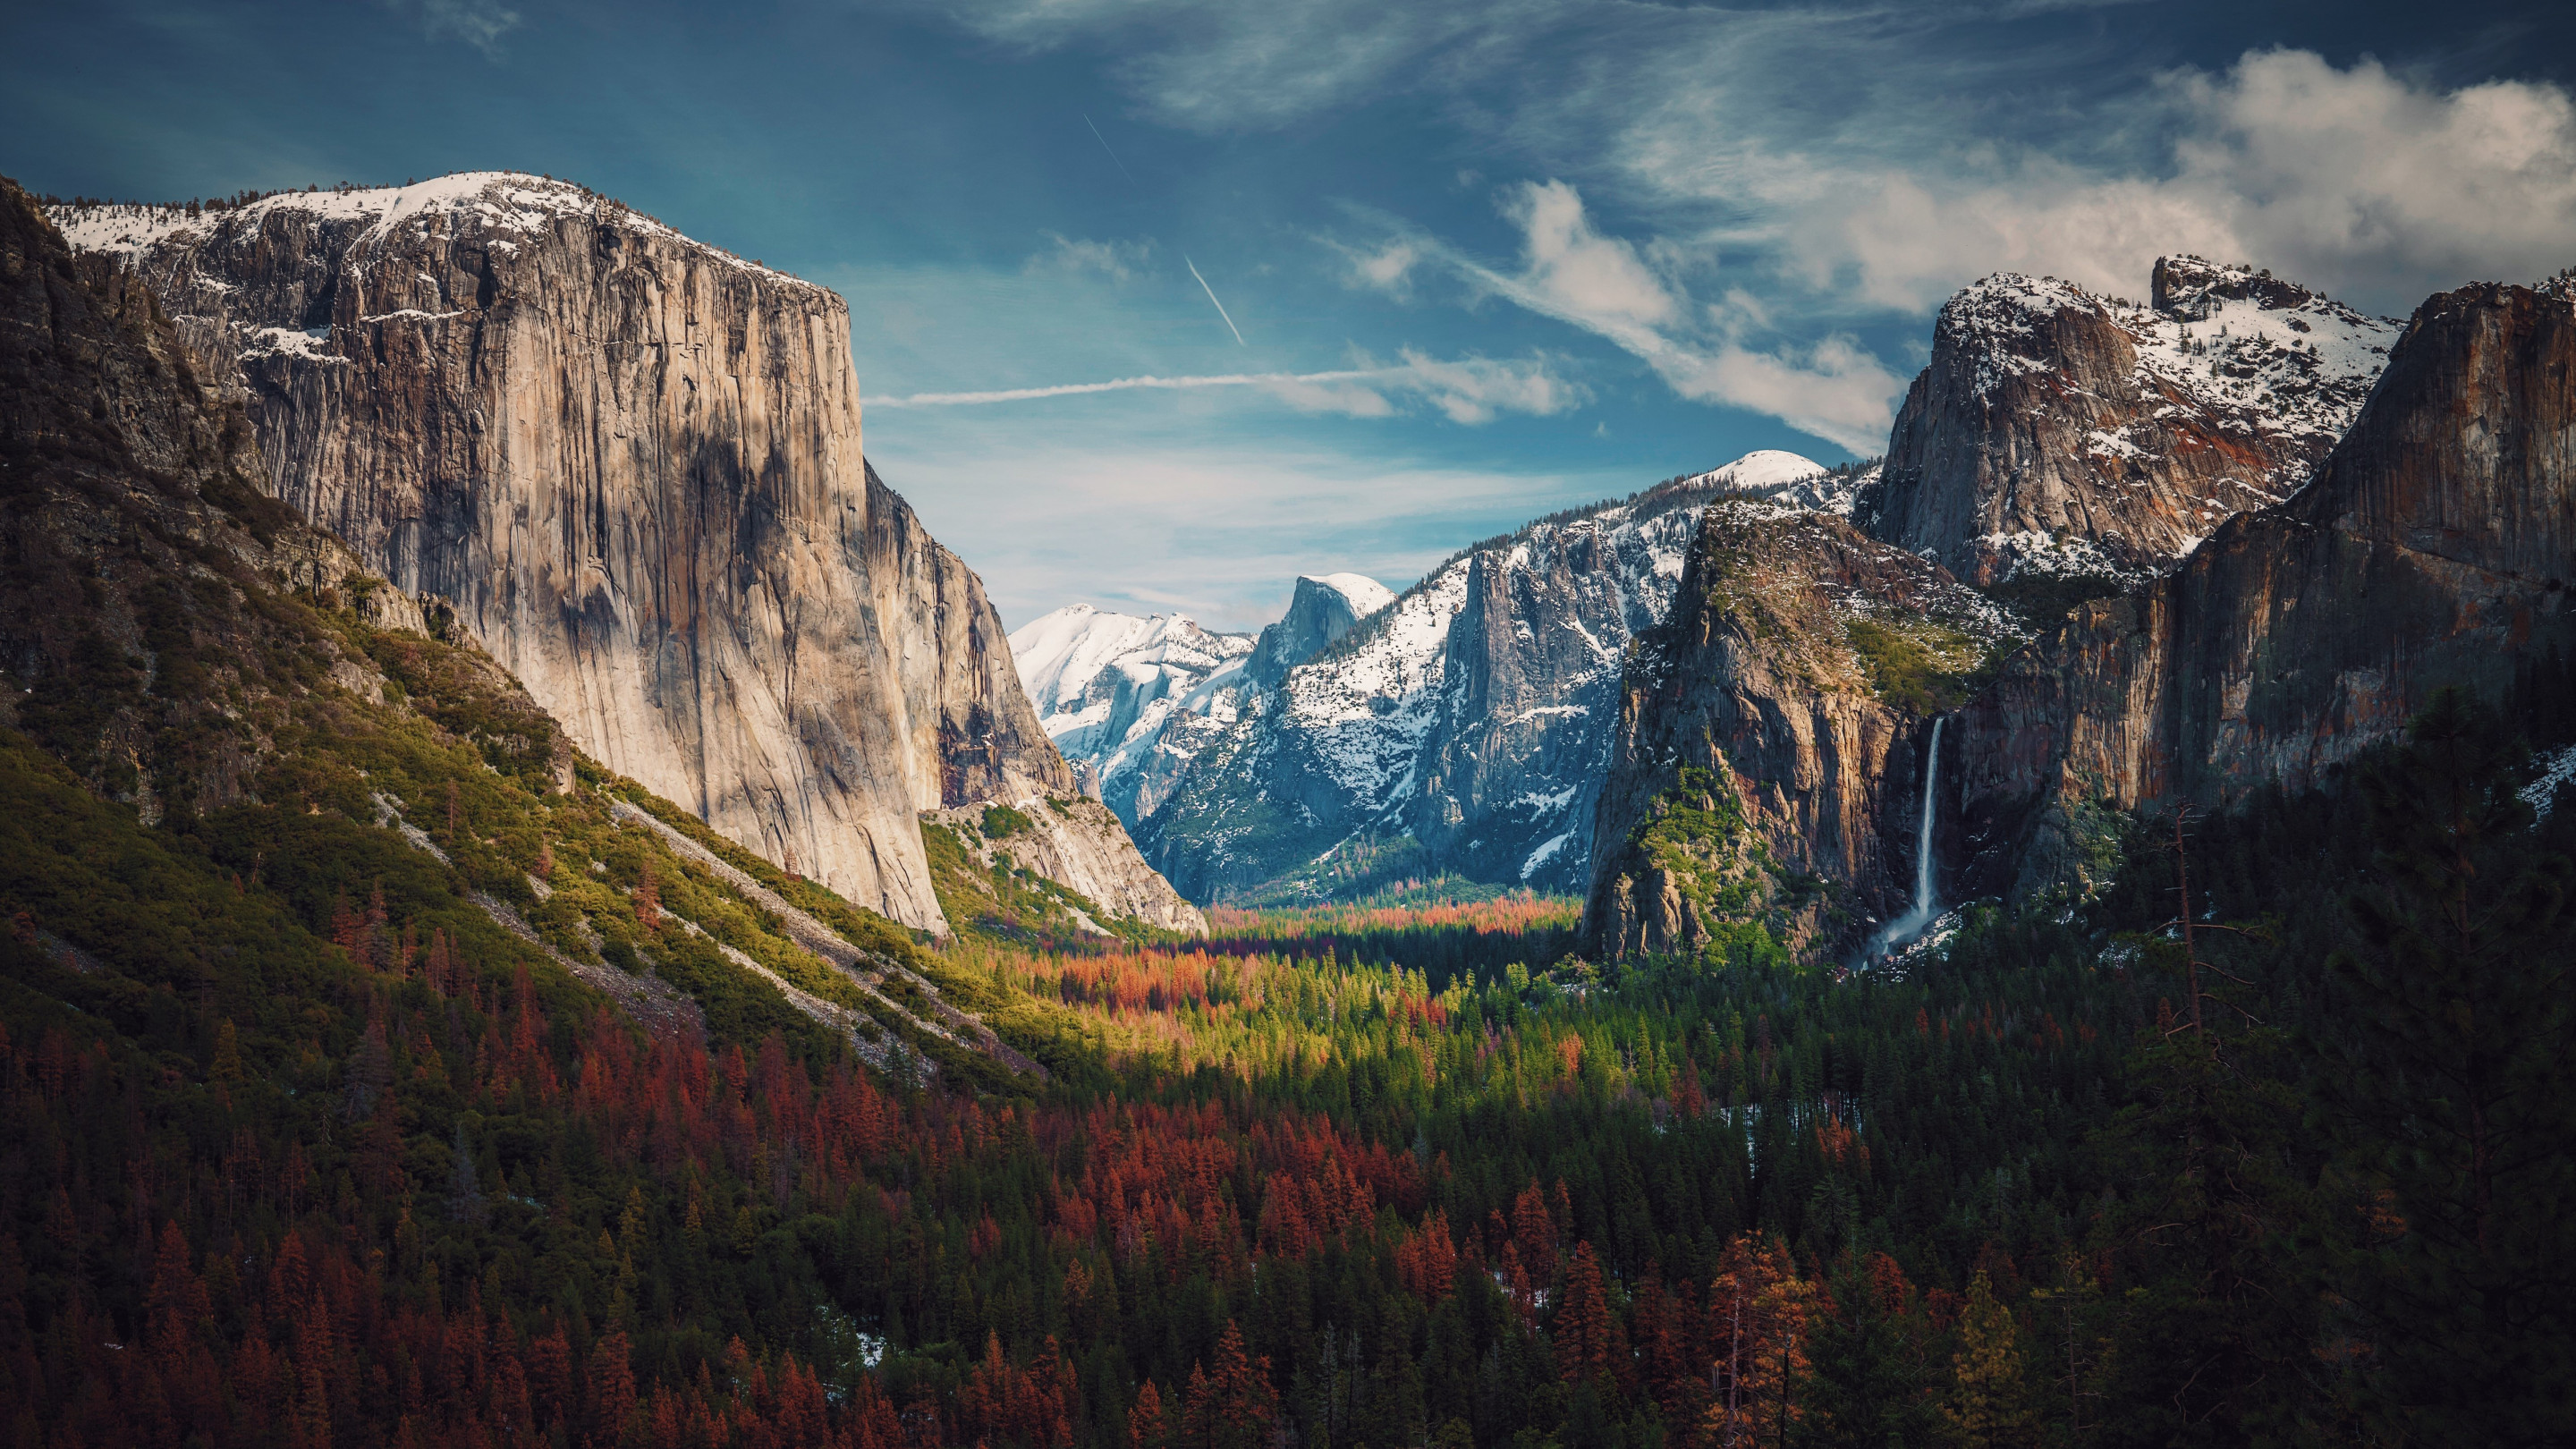 Best View from Yosemite wallpaper 2880x1620